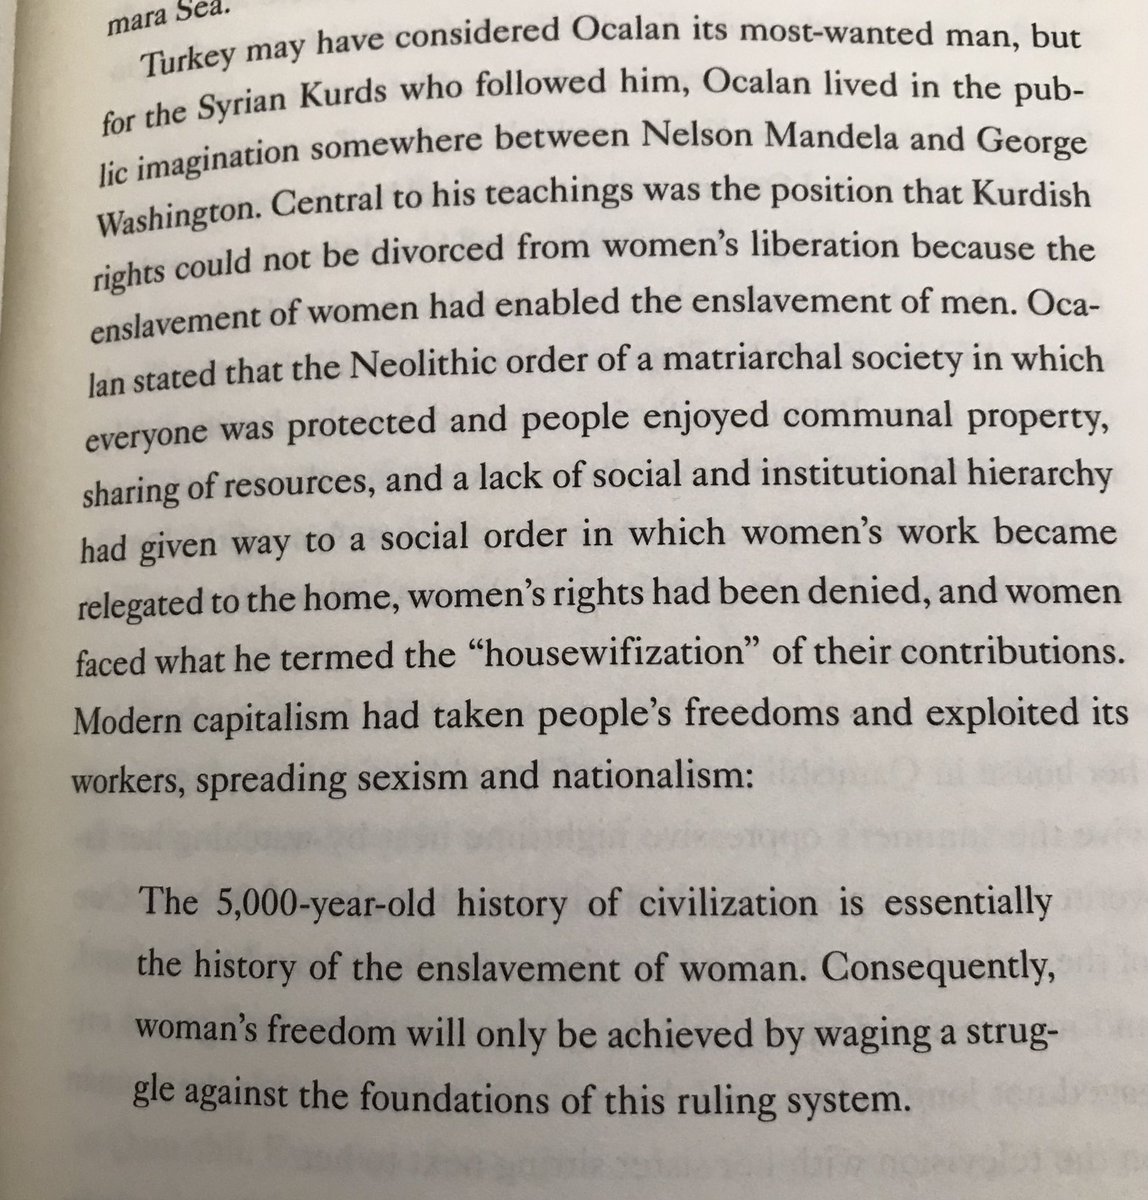 This is also straightforward and fair. I wonder if the history of how women in the movement made the adoption of this ideology possible will be brought up anywhere in the book, as that story has parallels to mainstreaming the same ideas in NES.